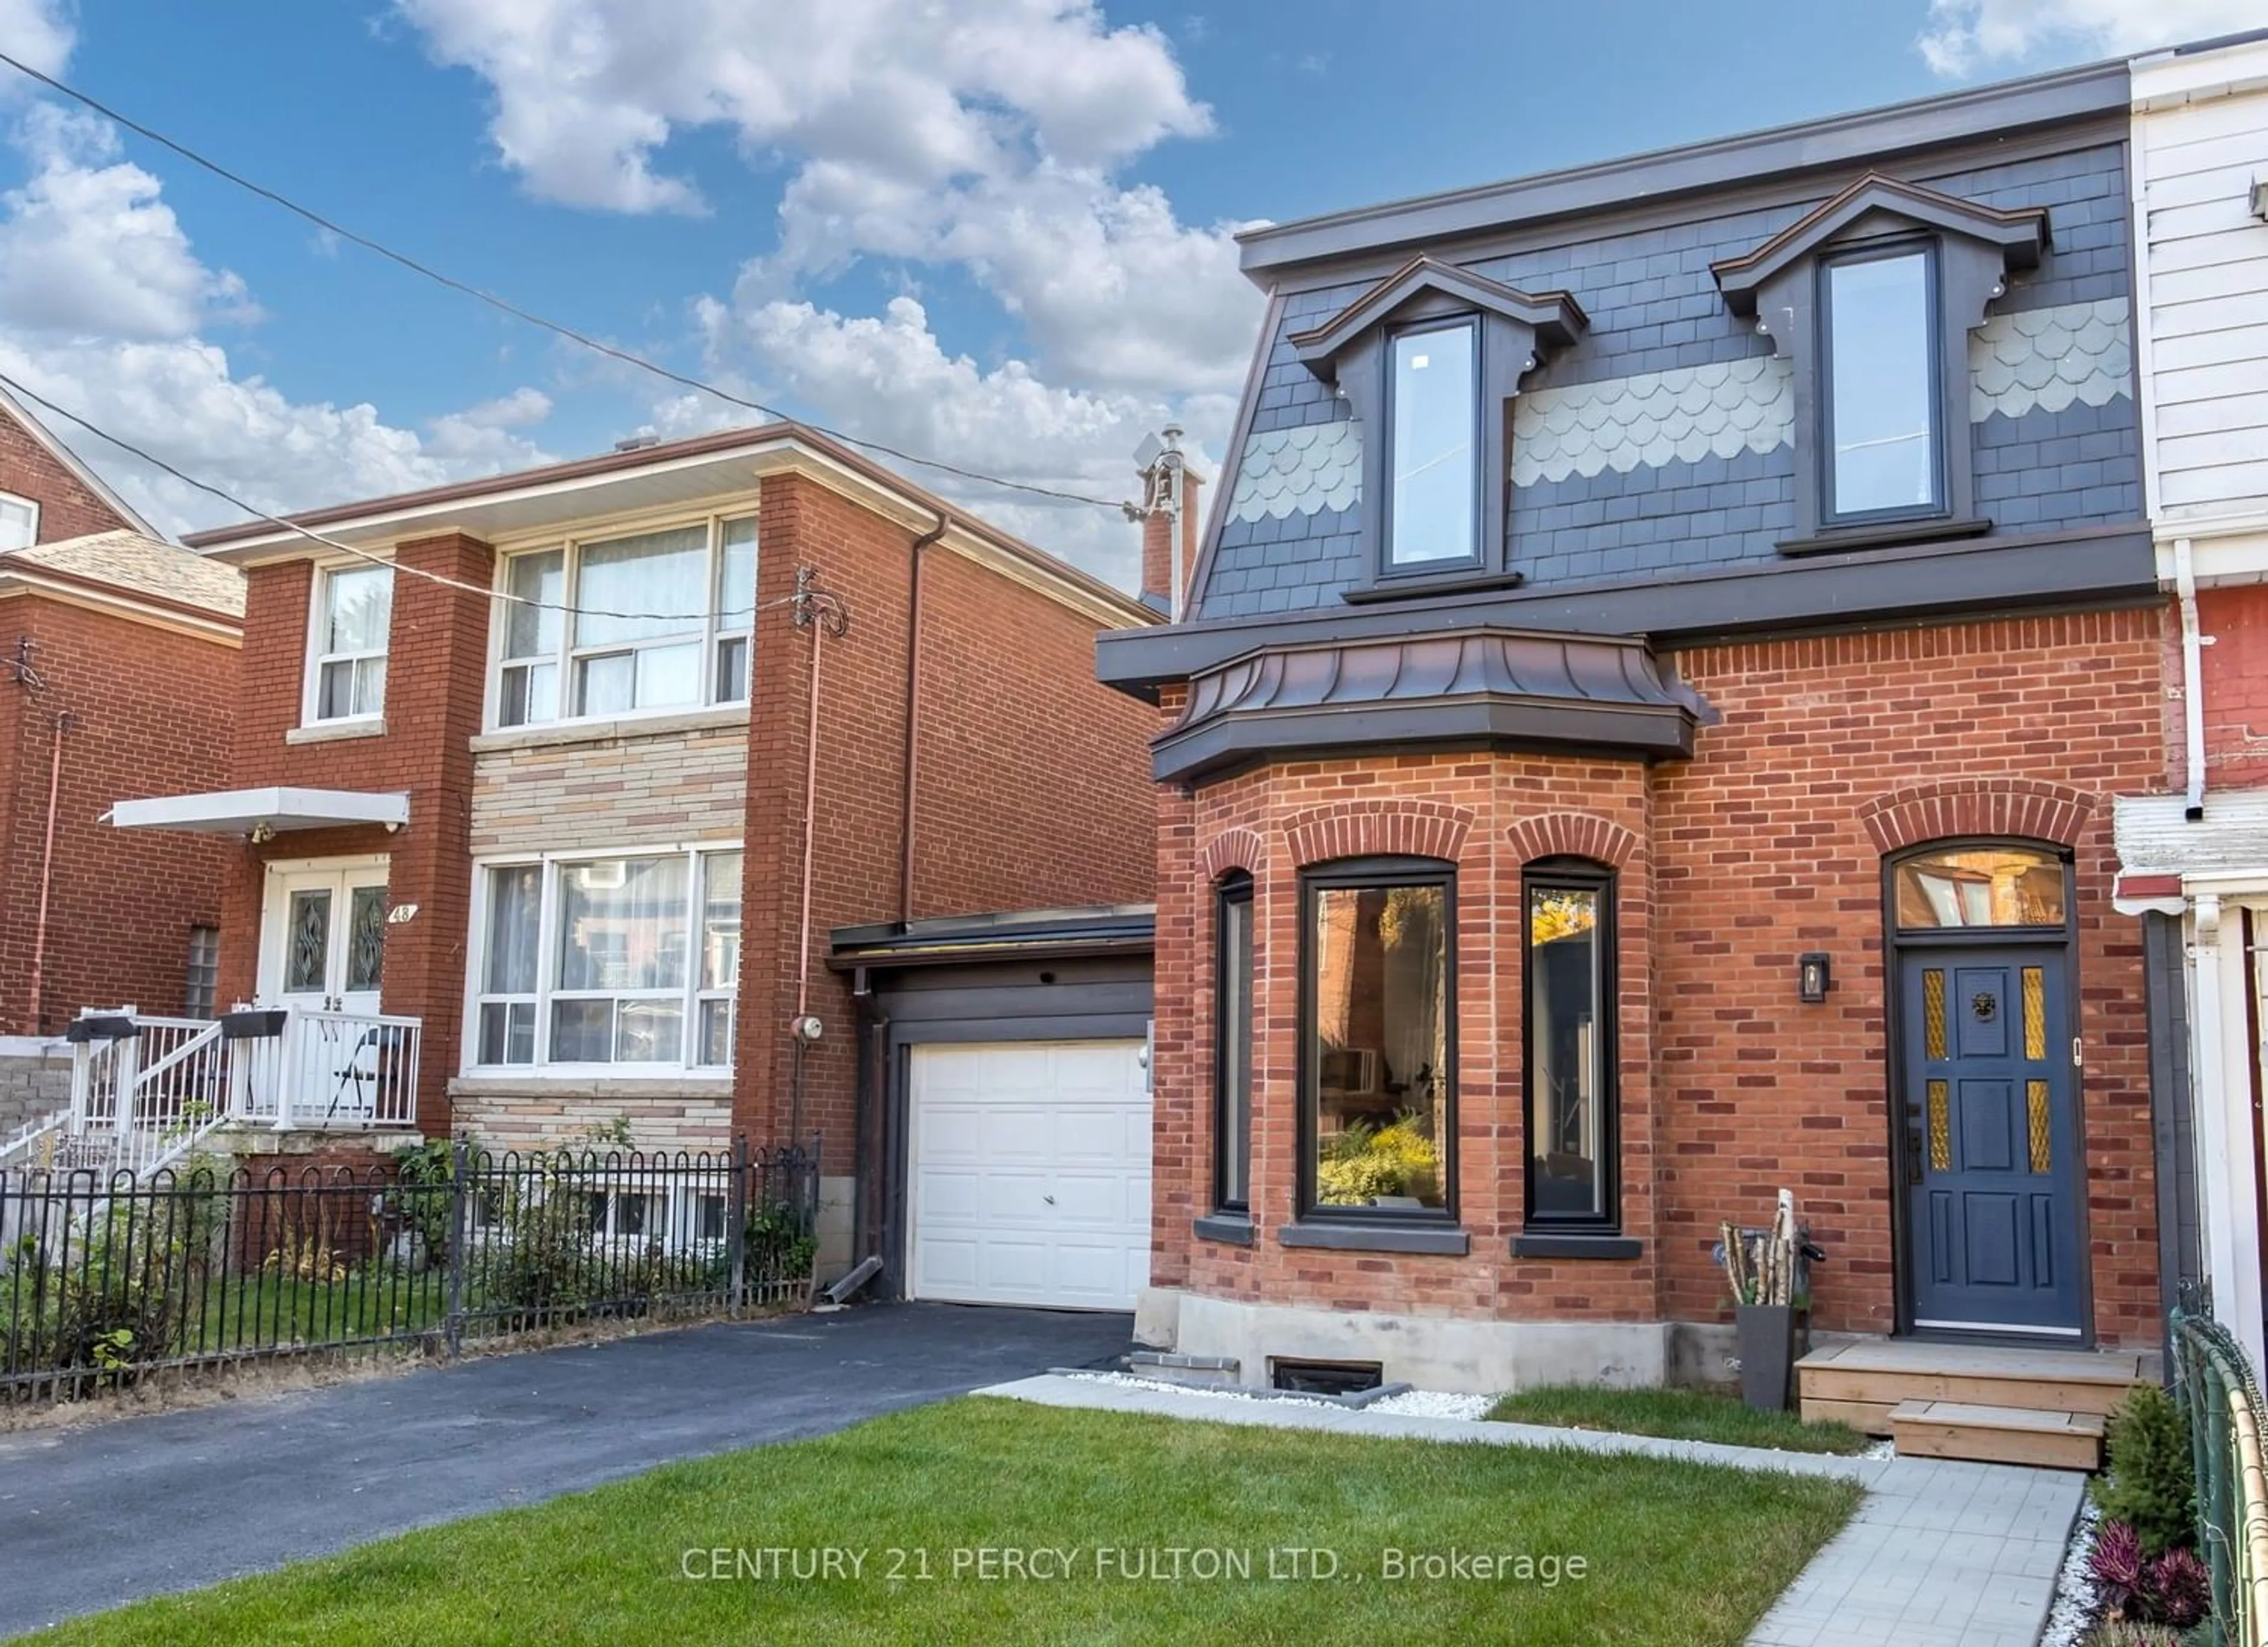 Home with brick exterior material for 50 Macdonell Ave, Toronto Ontario M6R 2A2